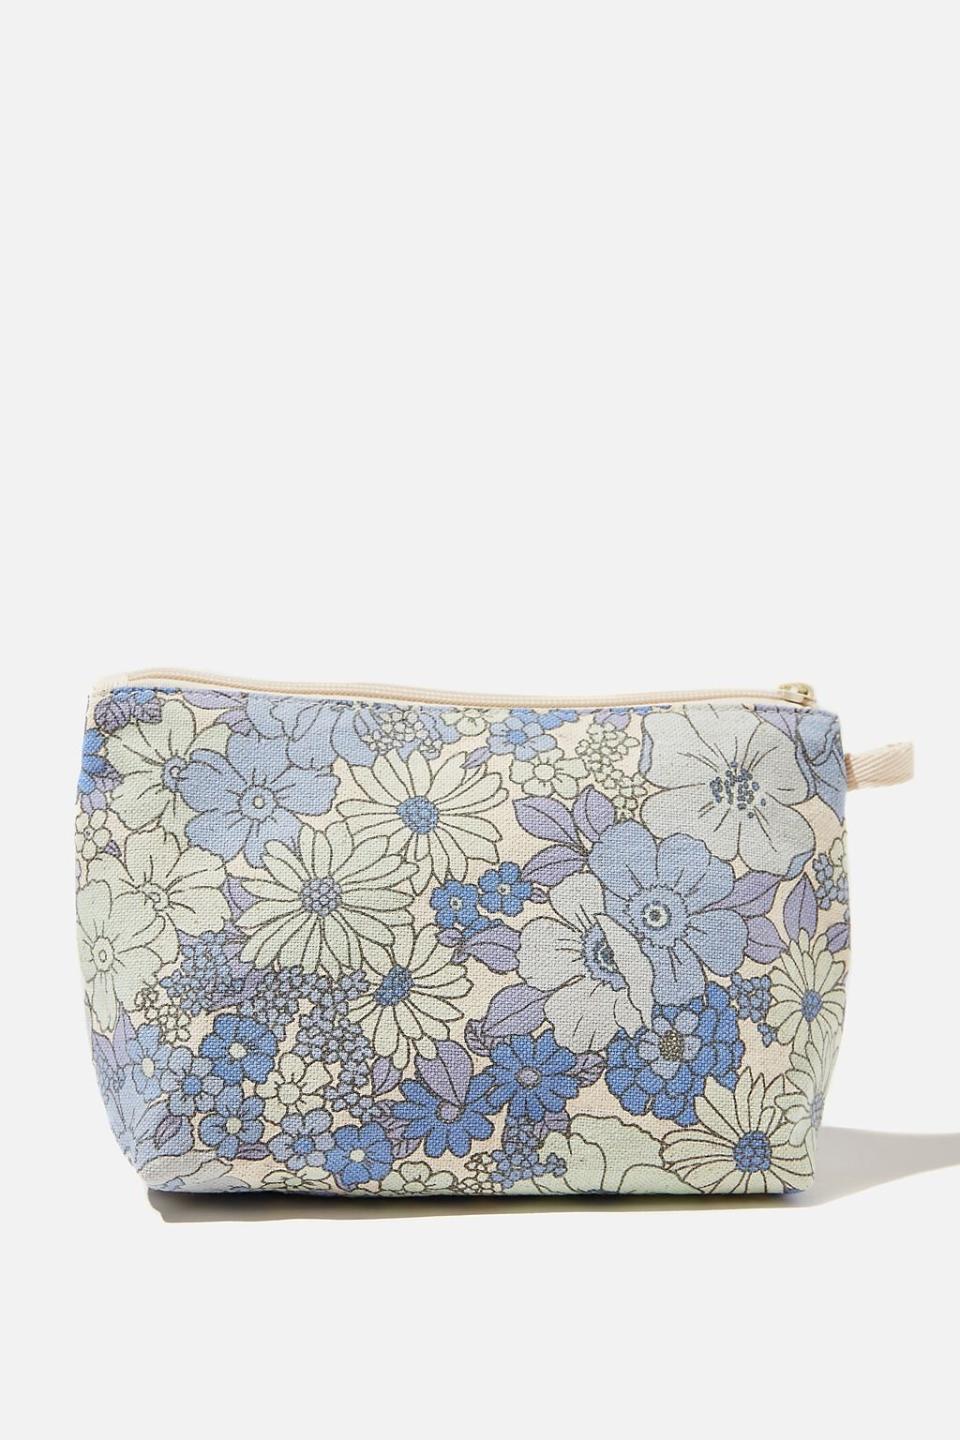 Cosmetic Pouch, $9.99